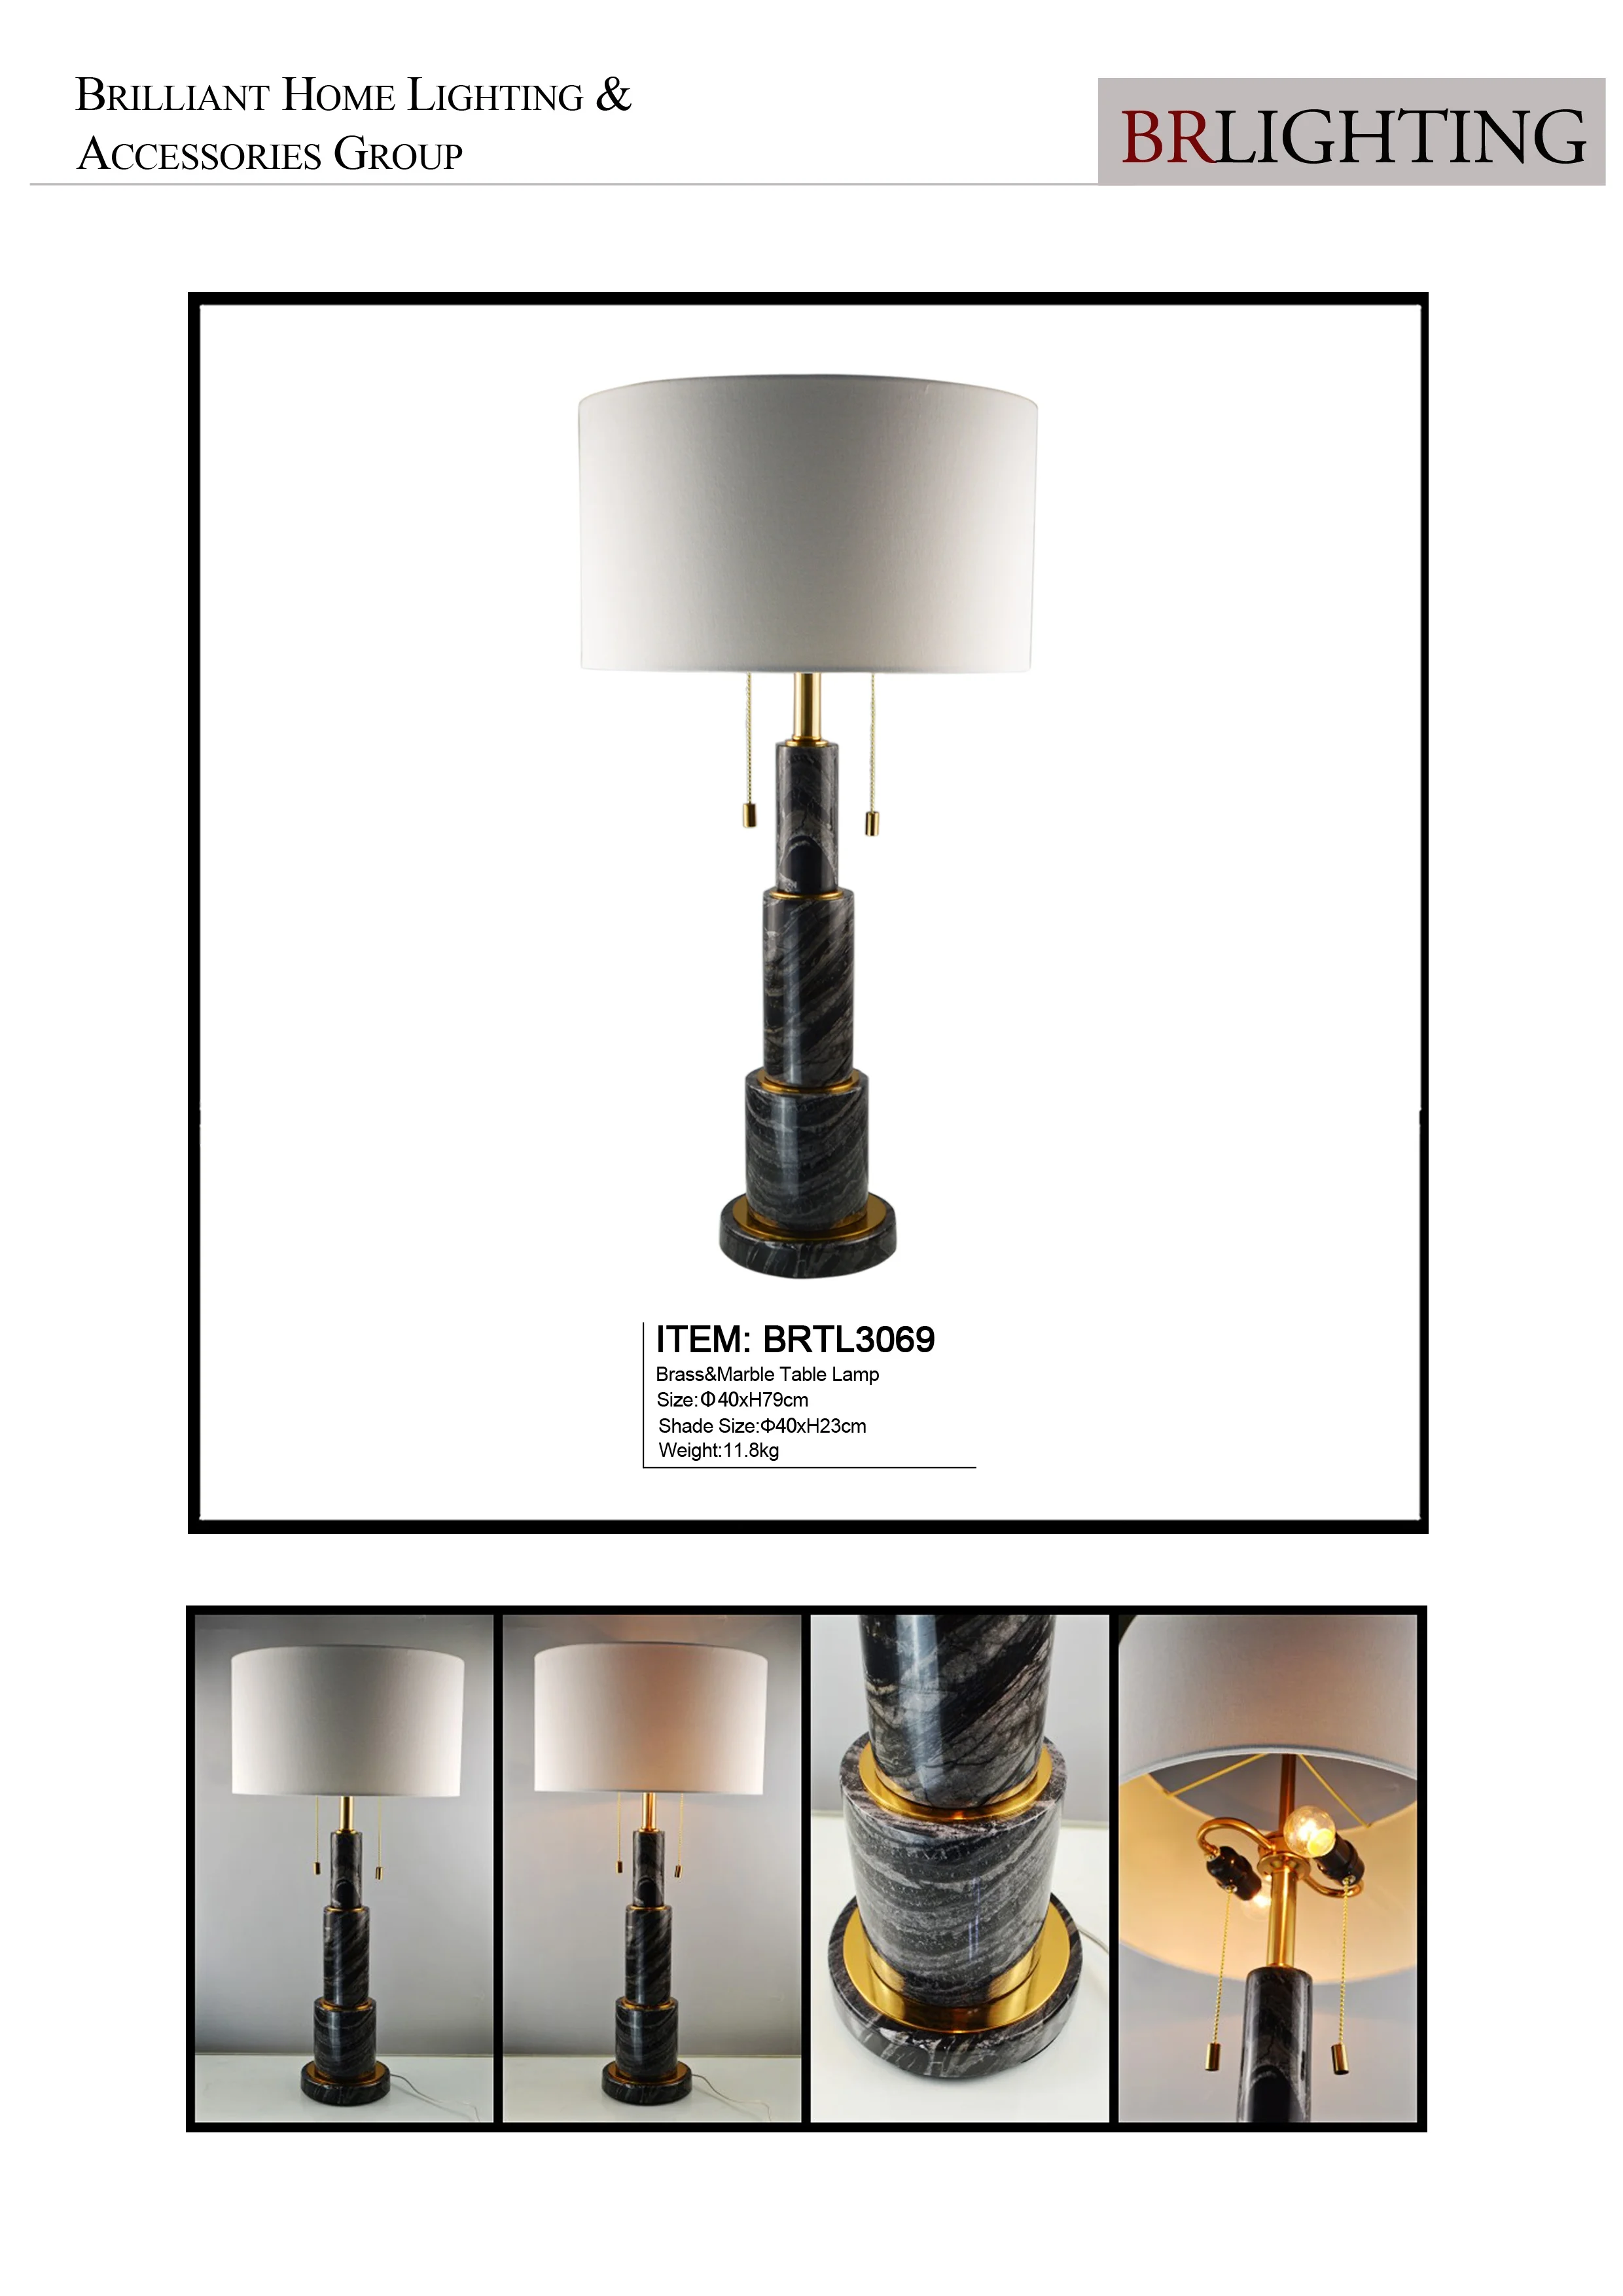 New products hot sell in america european market brass black marble table lamp for home decoration